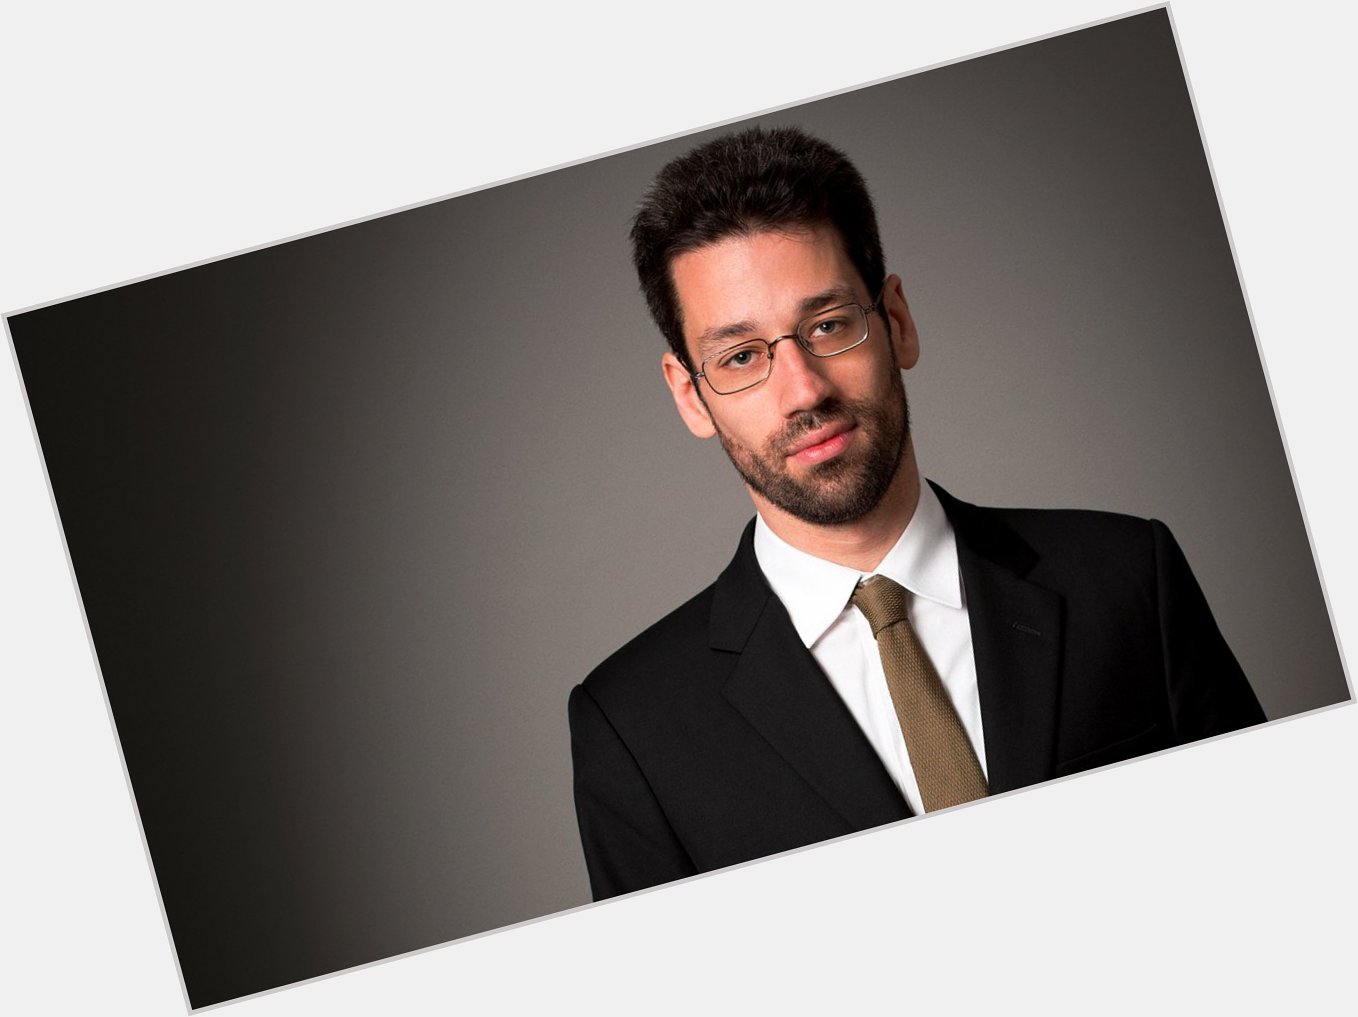 Happy birthday to pianist Jonathan Biss, who performs with the Curtis Symphony Orchestra here in February! 